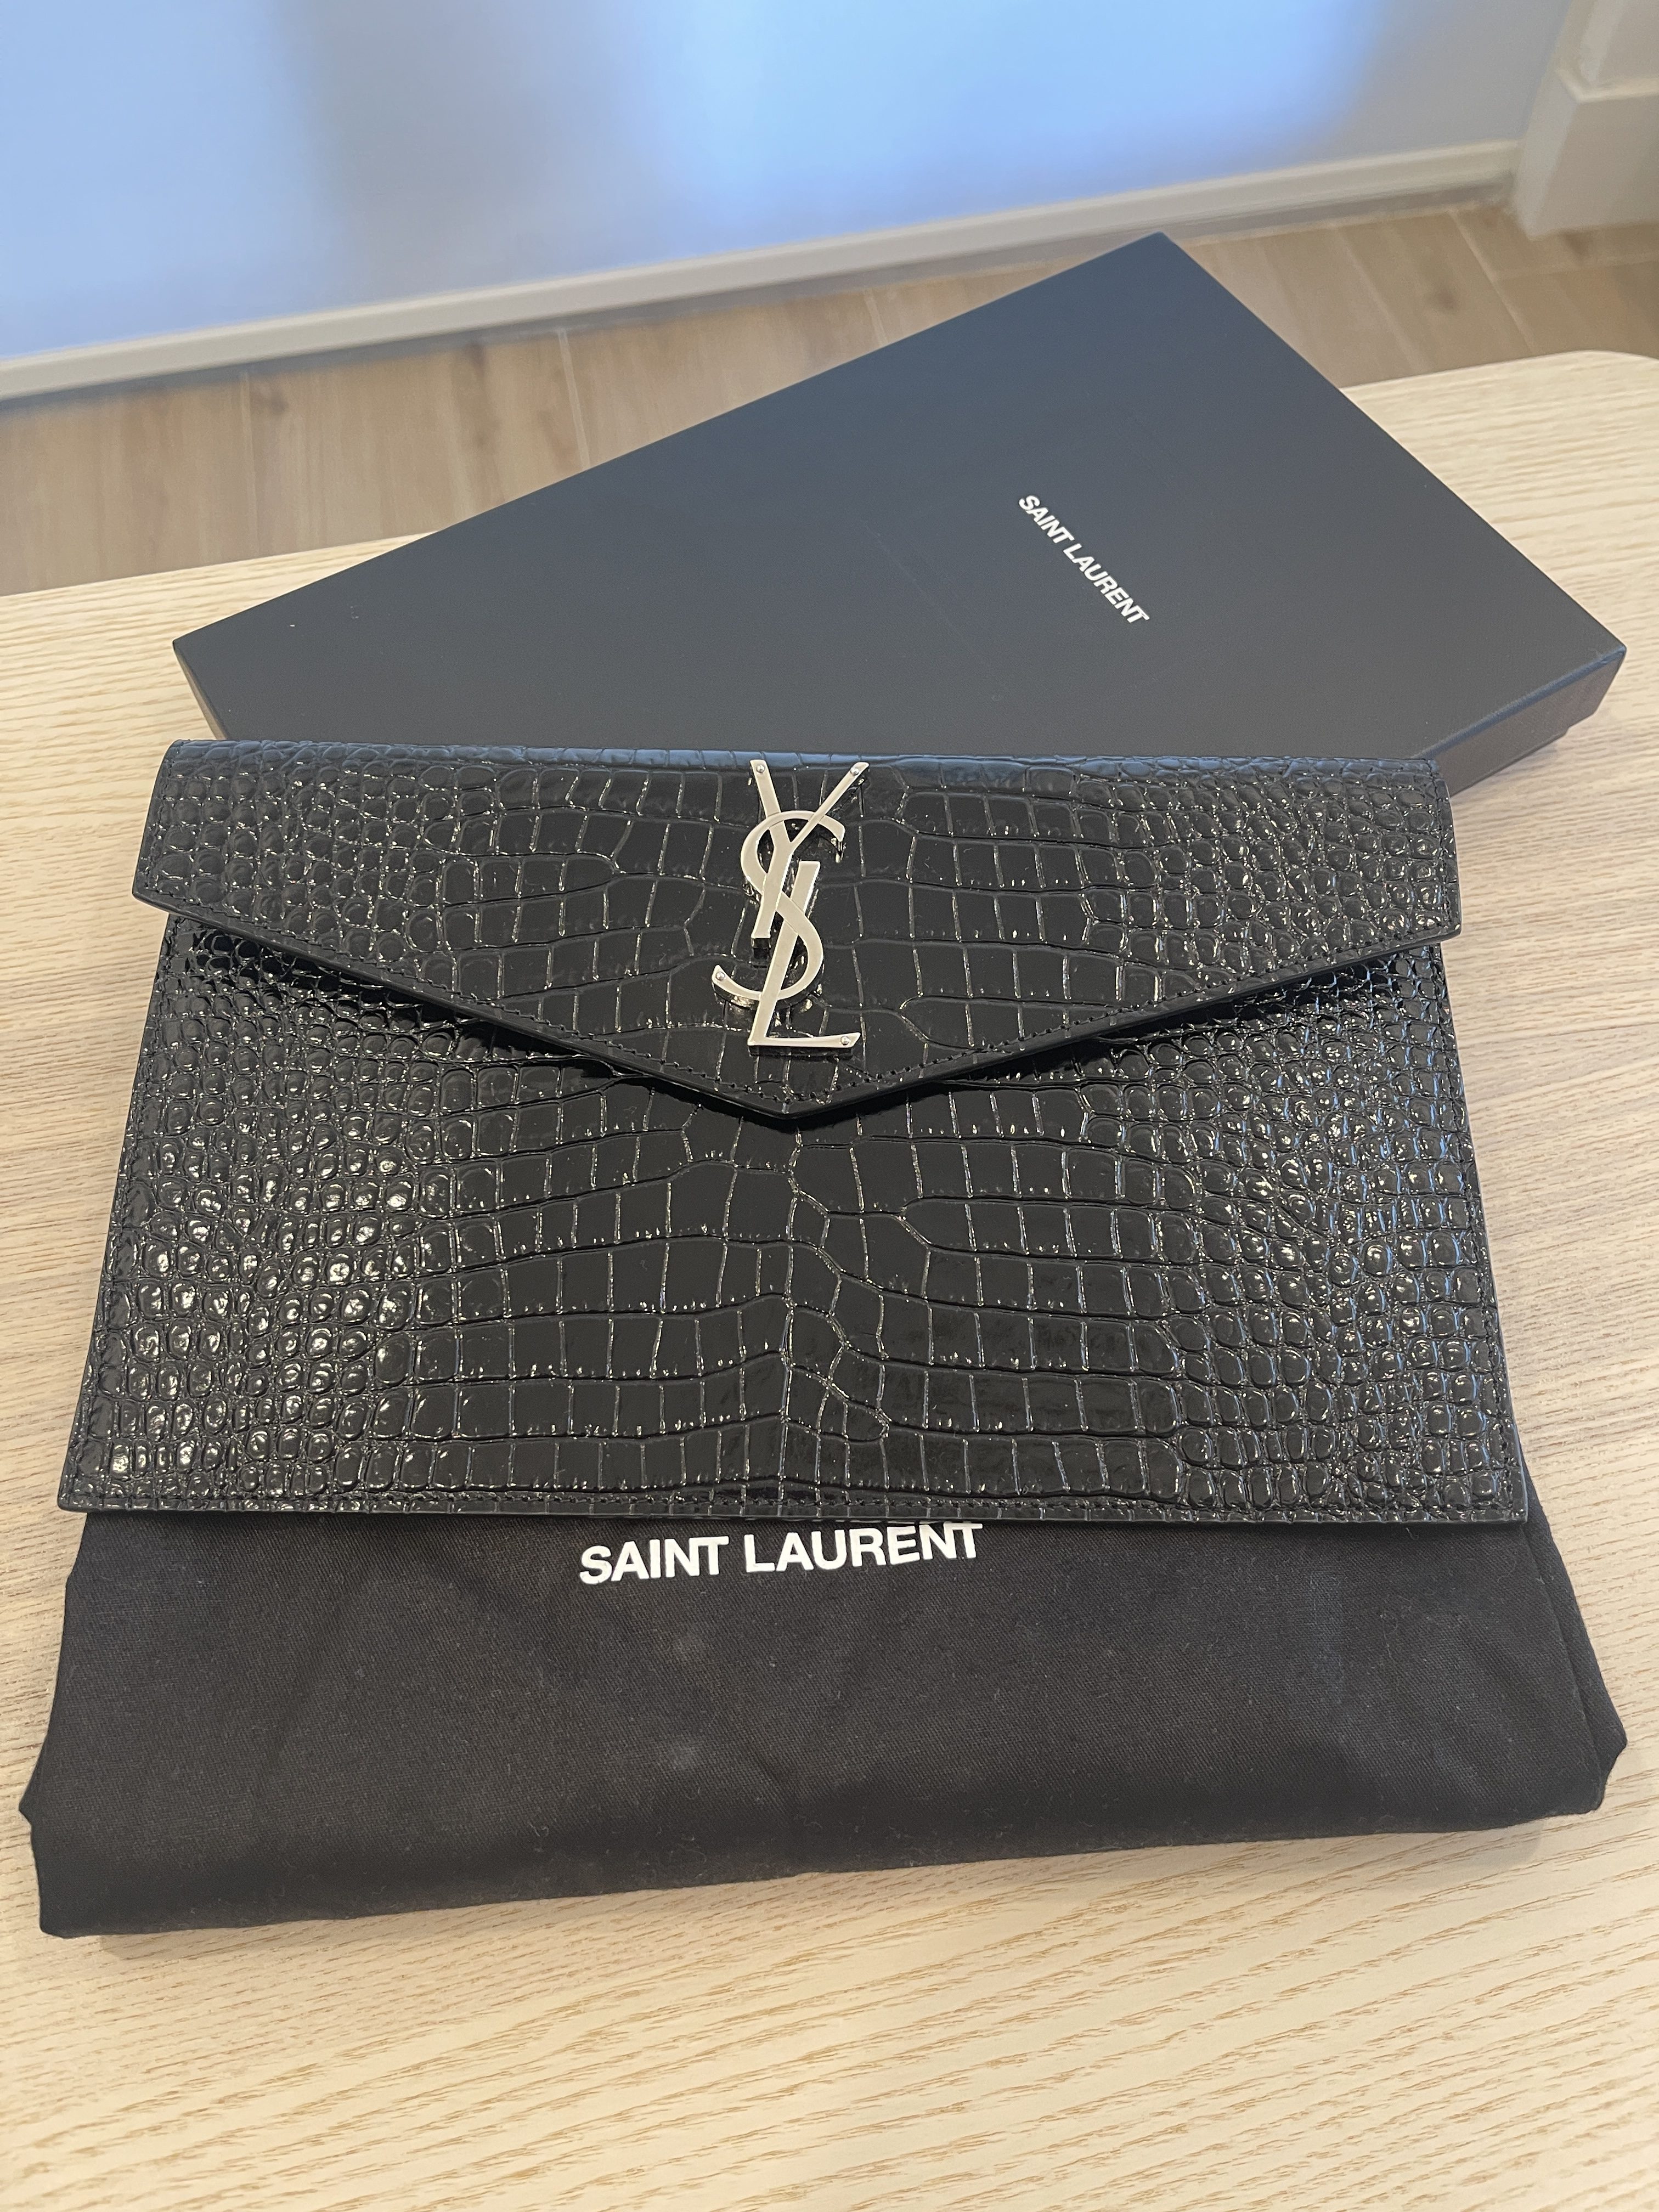 Saint Laurent Uptown Pouch in Crocodile Embossed Shiny Leather Black